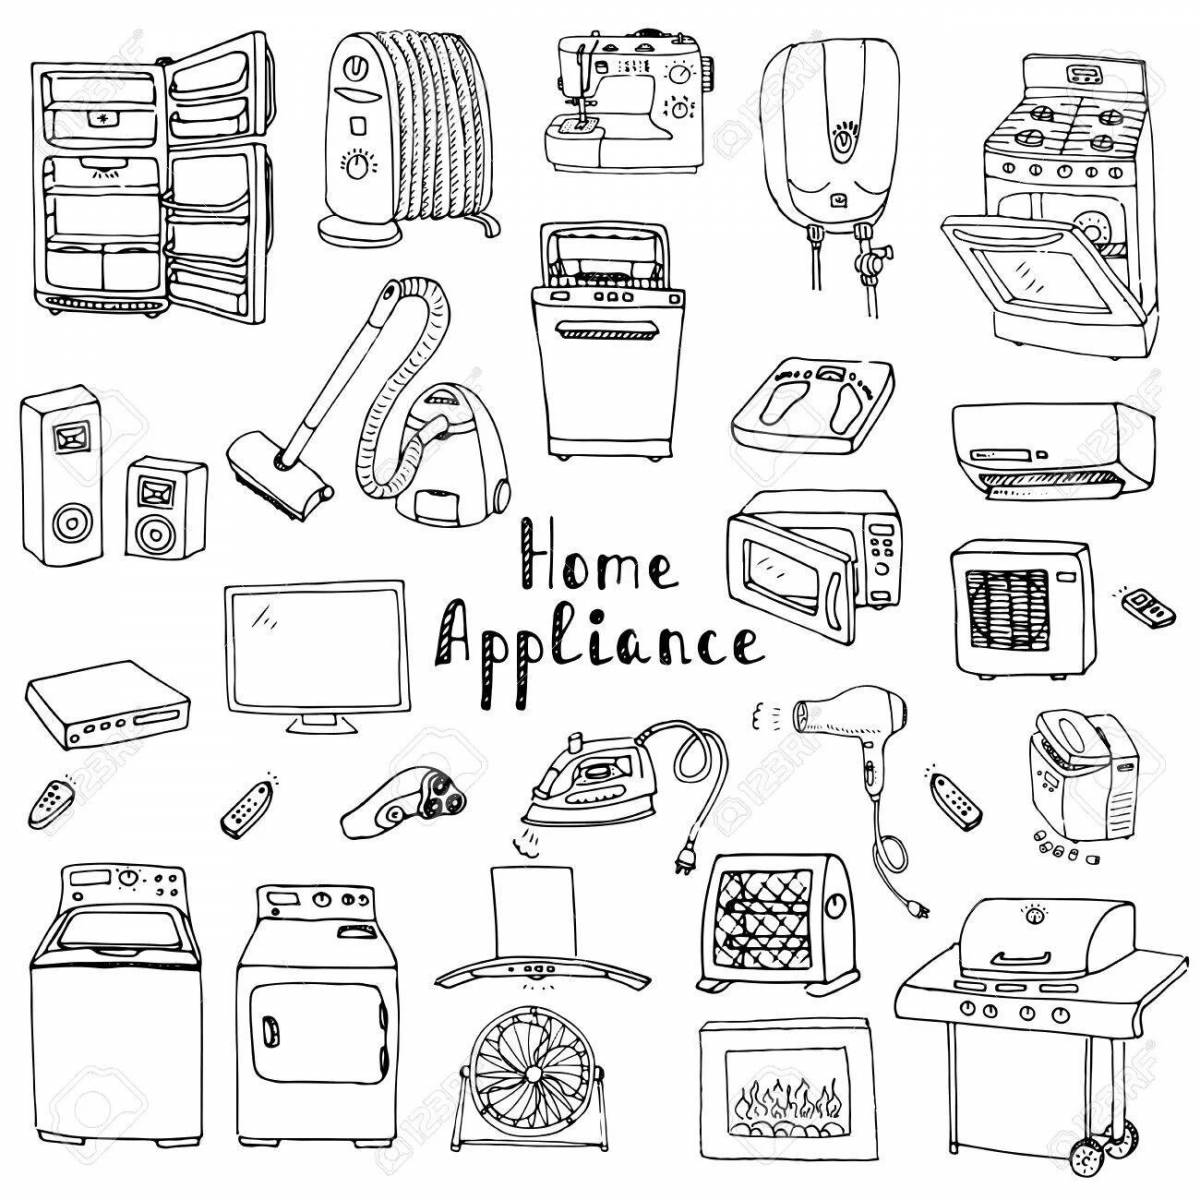 Intricate furniture, appliances, coloring